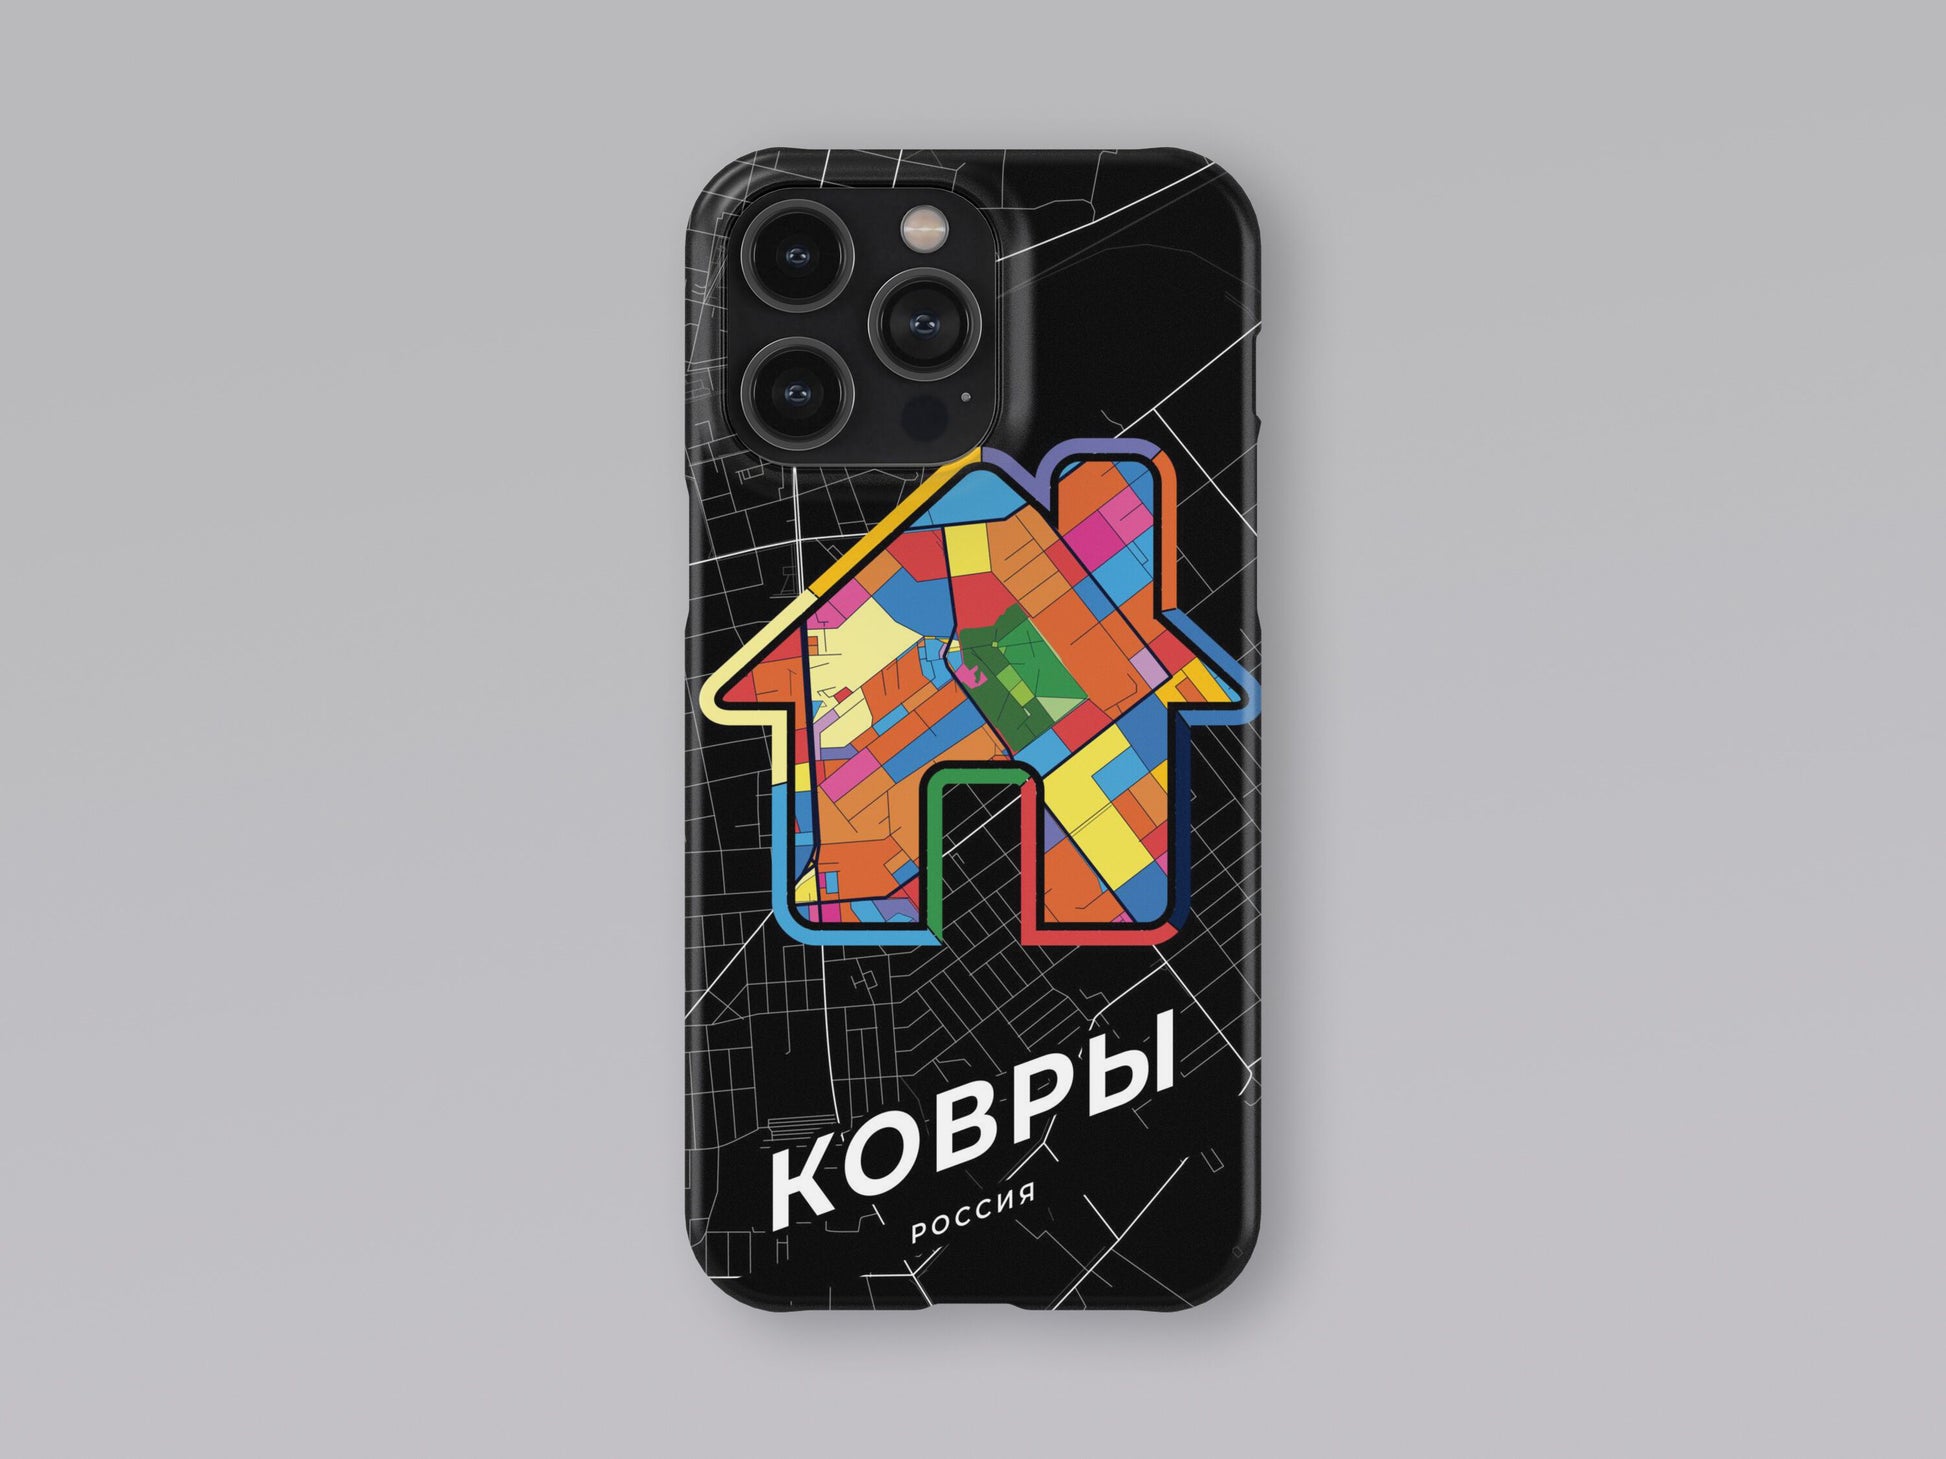 Kovrov Russia slim phone case with colorful icon. Birthday, wedding or housewarming gift. Couple match cases. 3